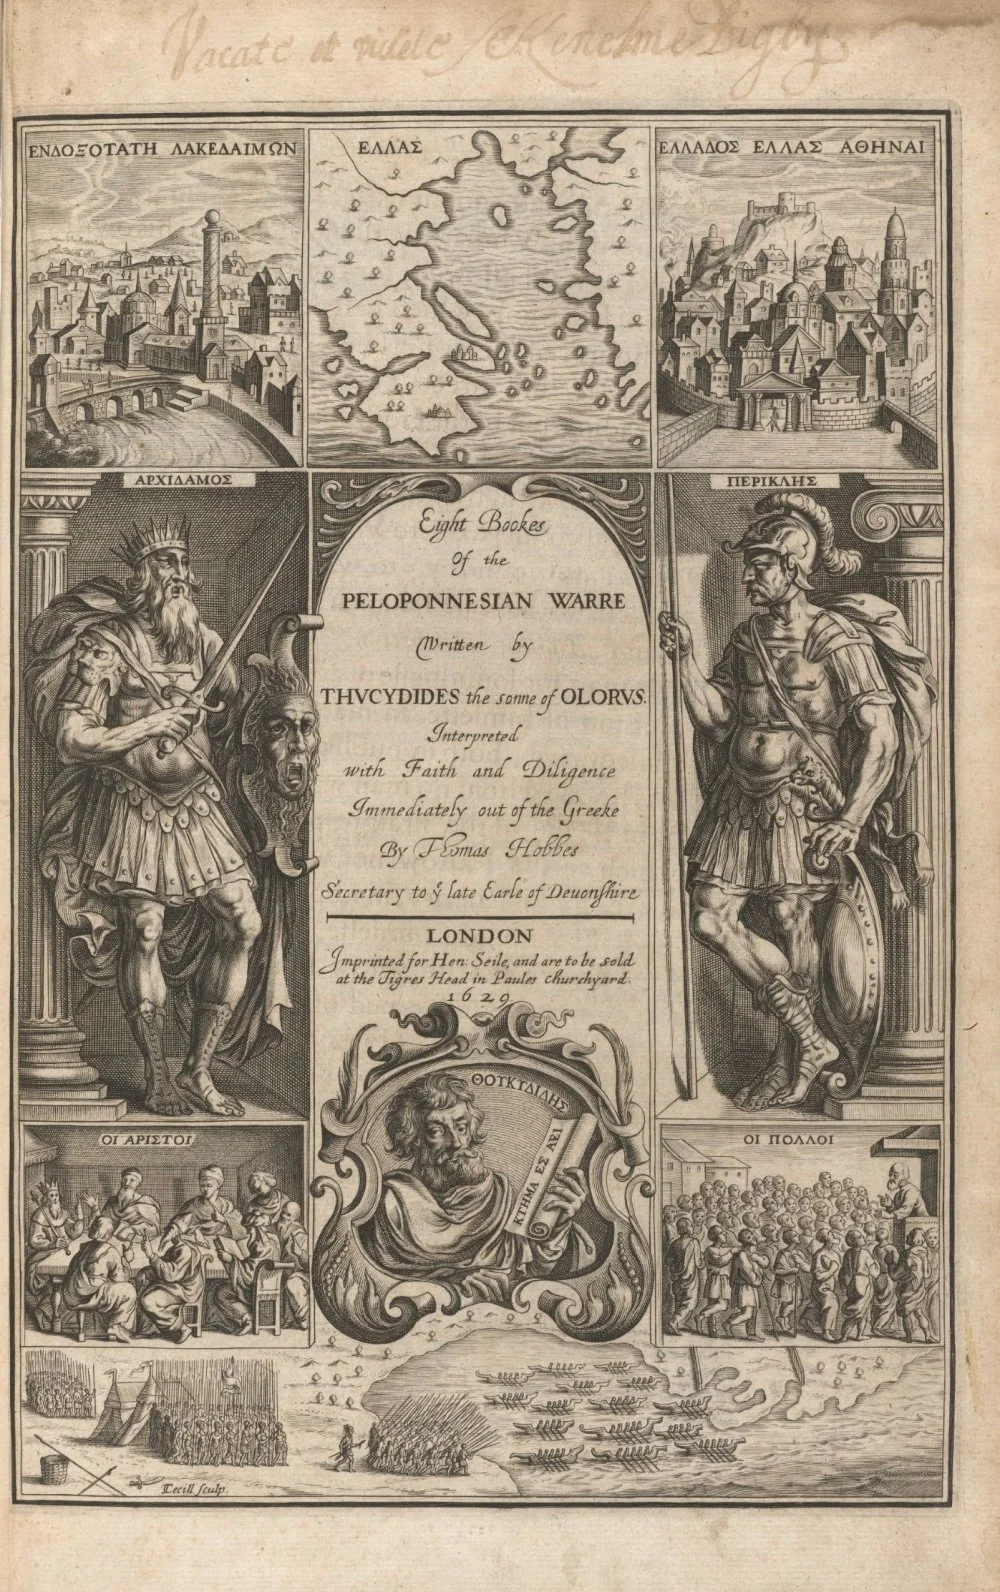 “ Eight bookes of the Peloponnesian Warre” written by Thucydides the sonne of Olorus. Interpreted by Thomas Hobbes. Published in 1629/Houghton Library, Harvard University/Wikimedia Commons